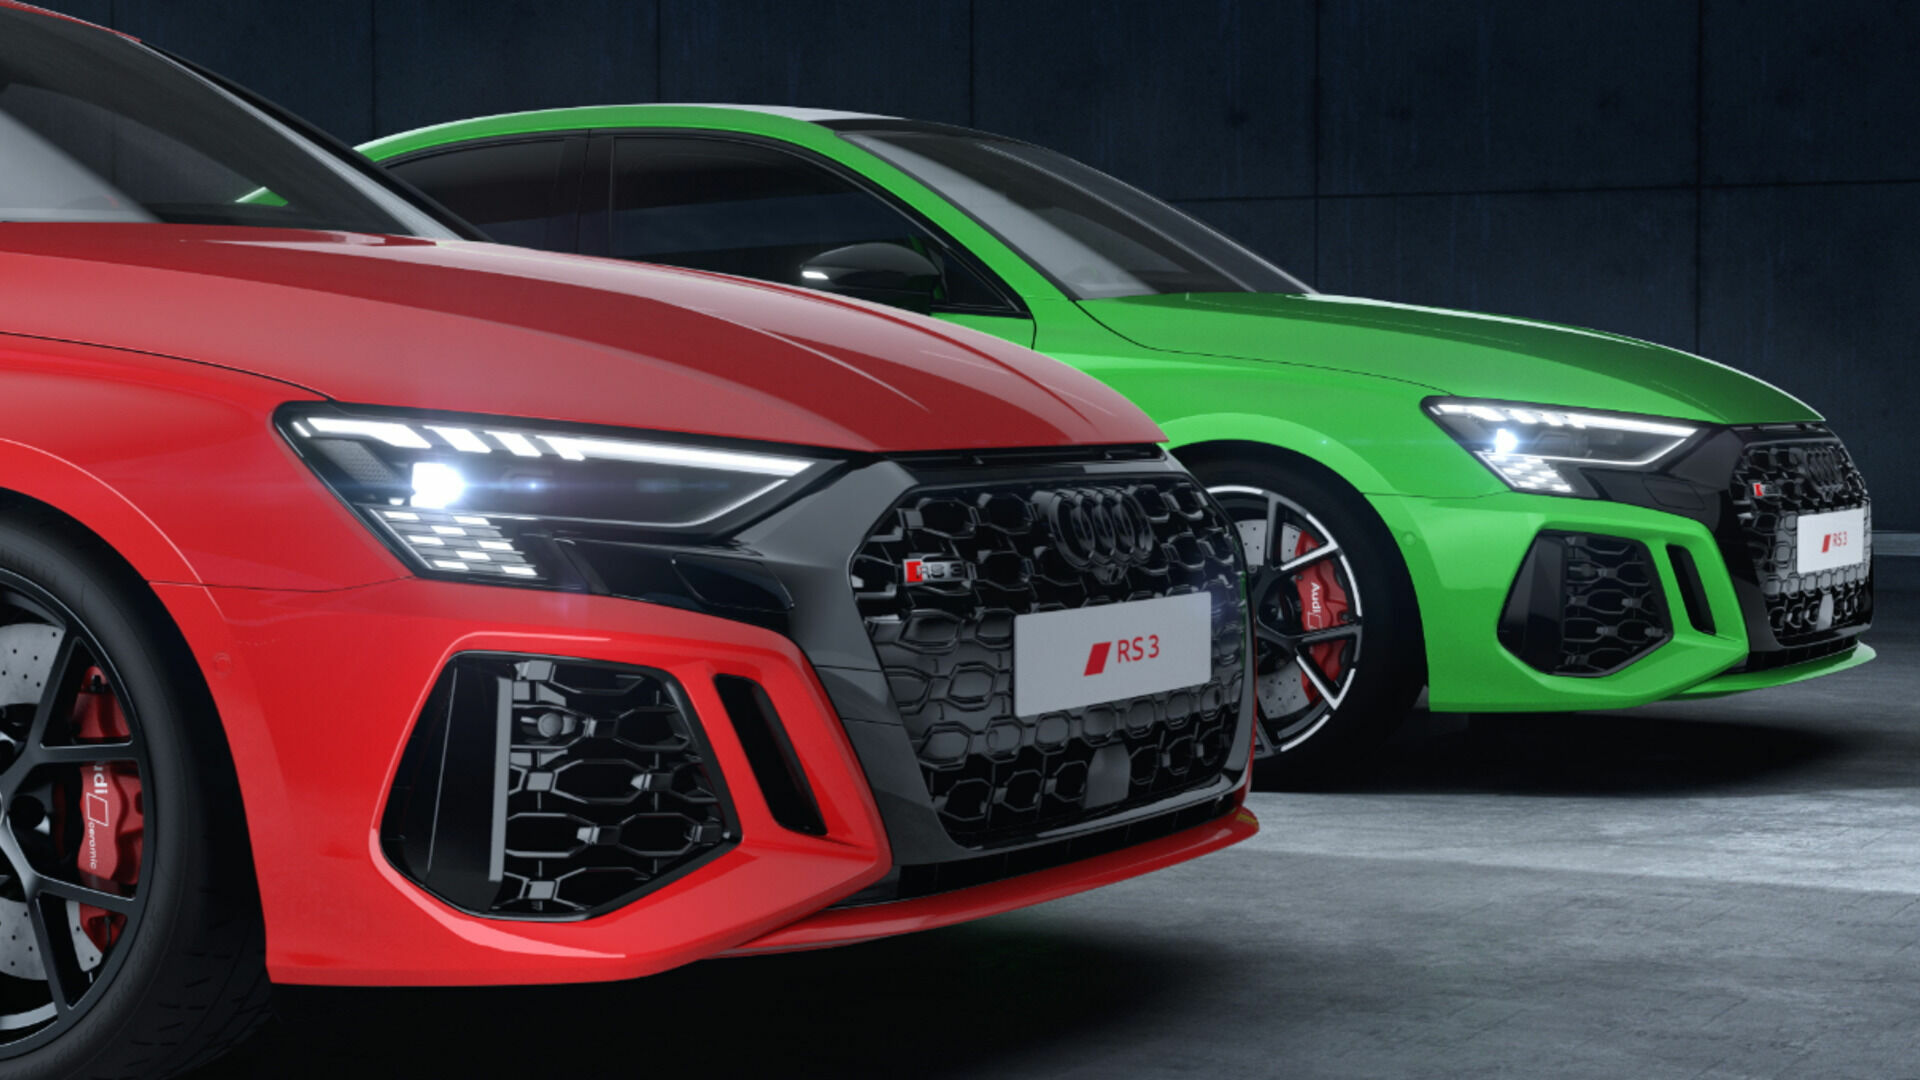 Animation: Audi RS 3 – Design and daytime running lights